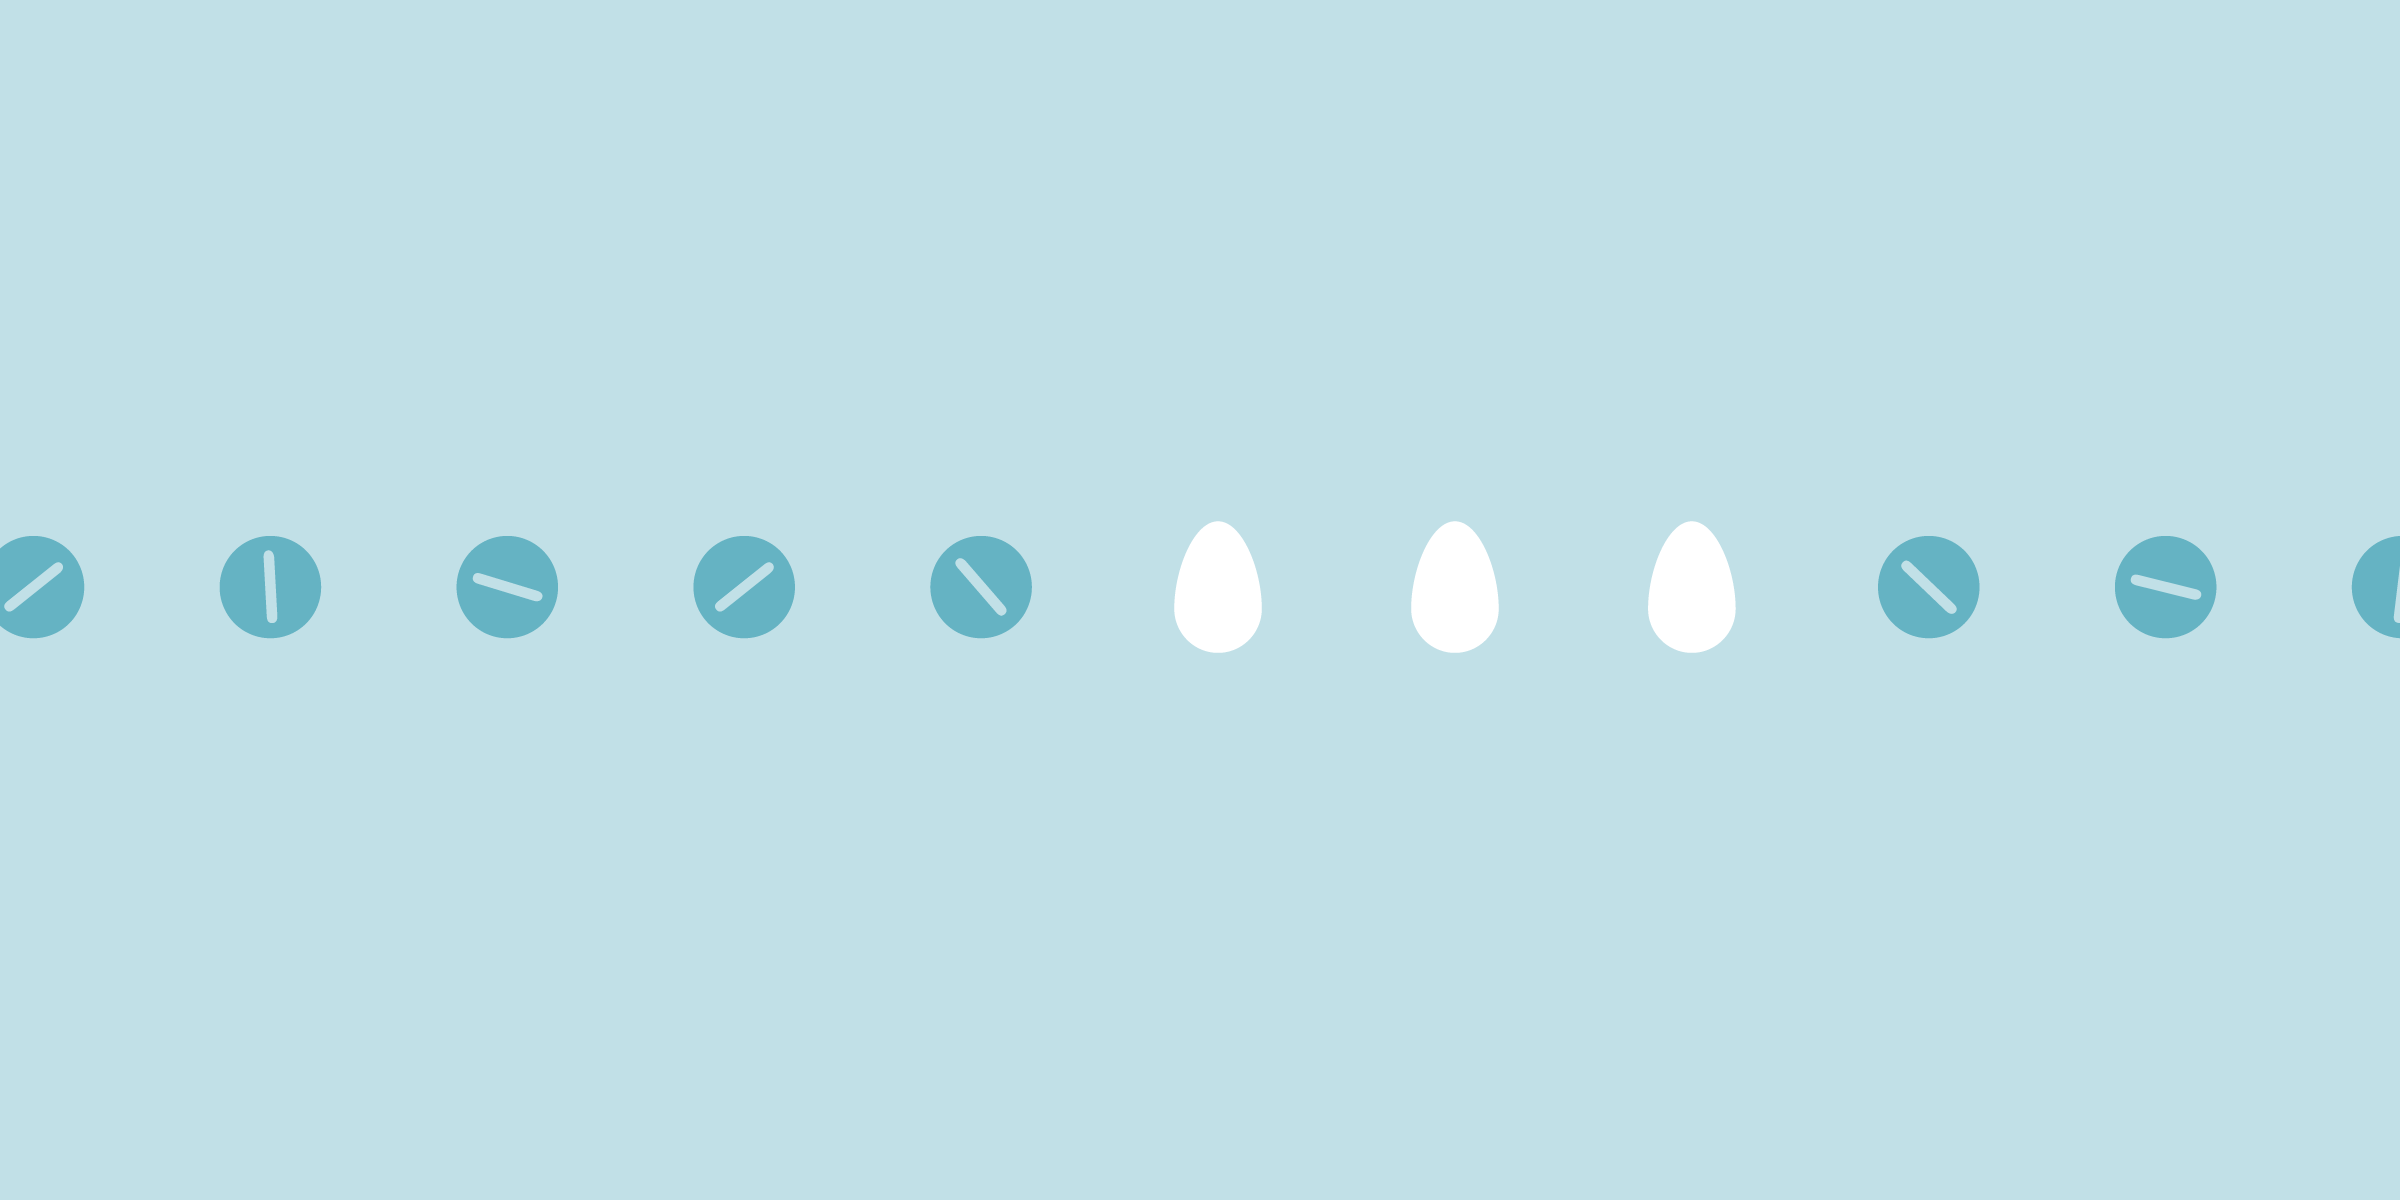 a row of blue pills and three white eggs on a light blue background